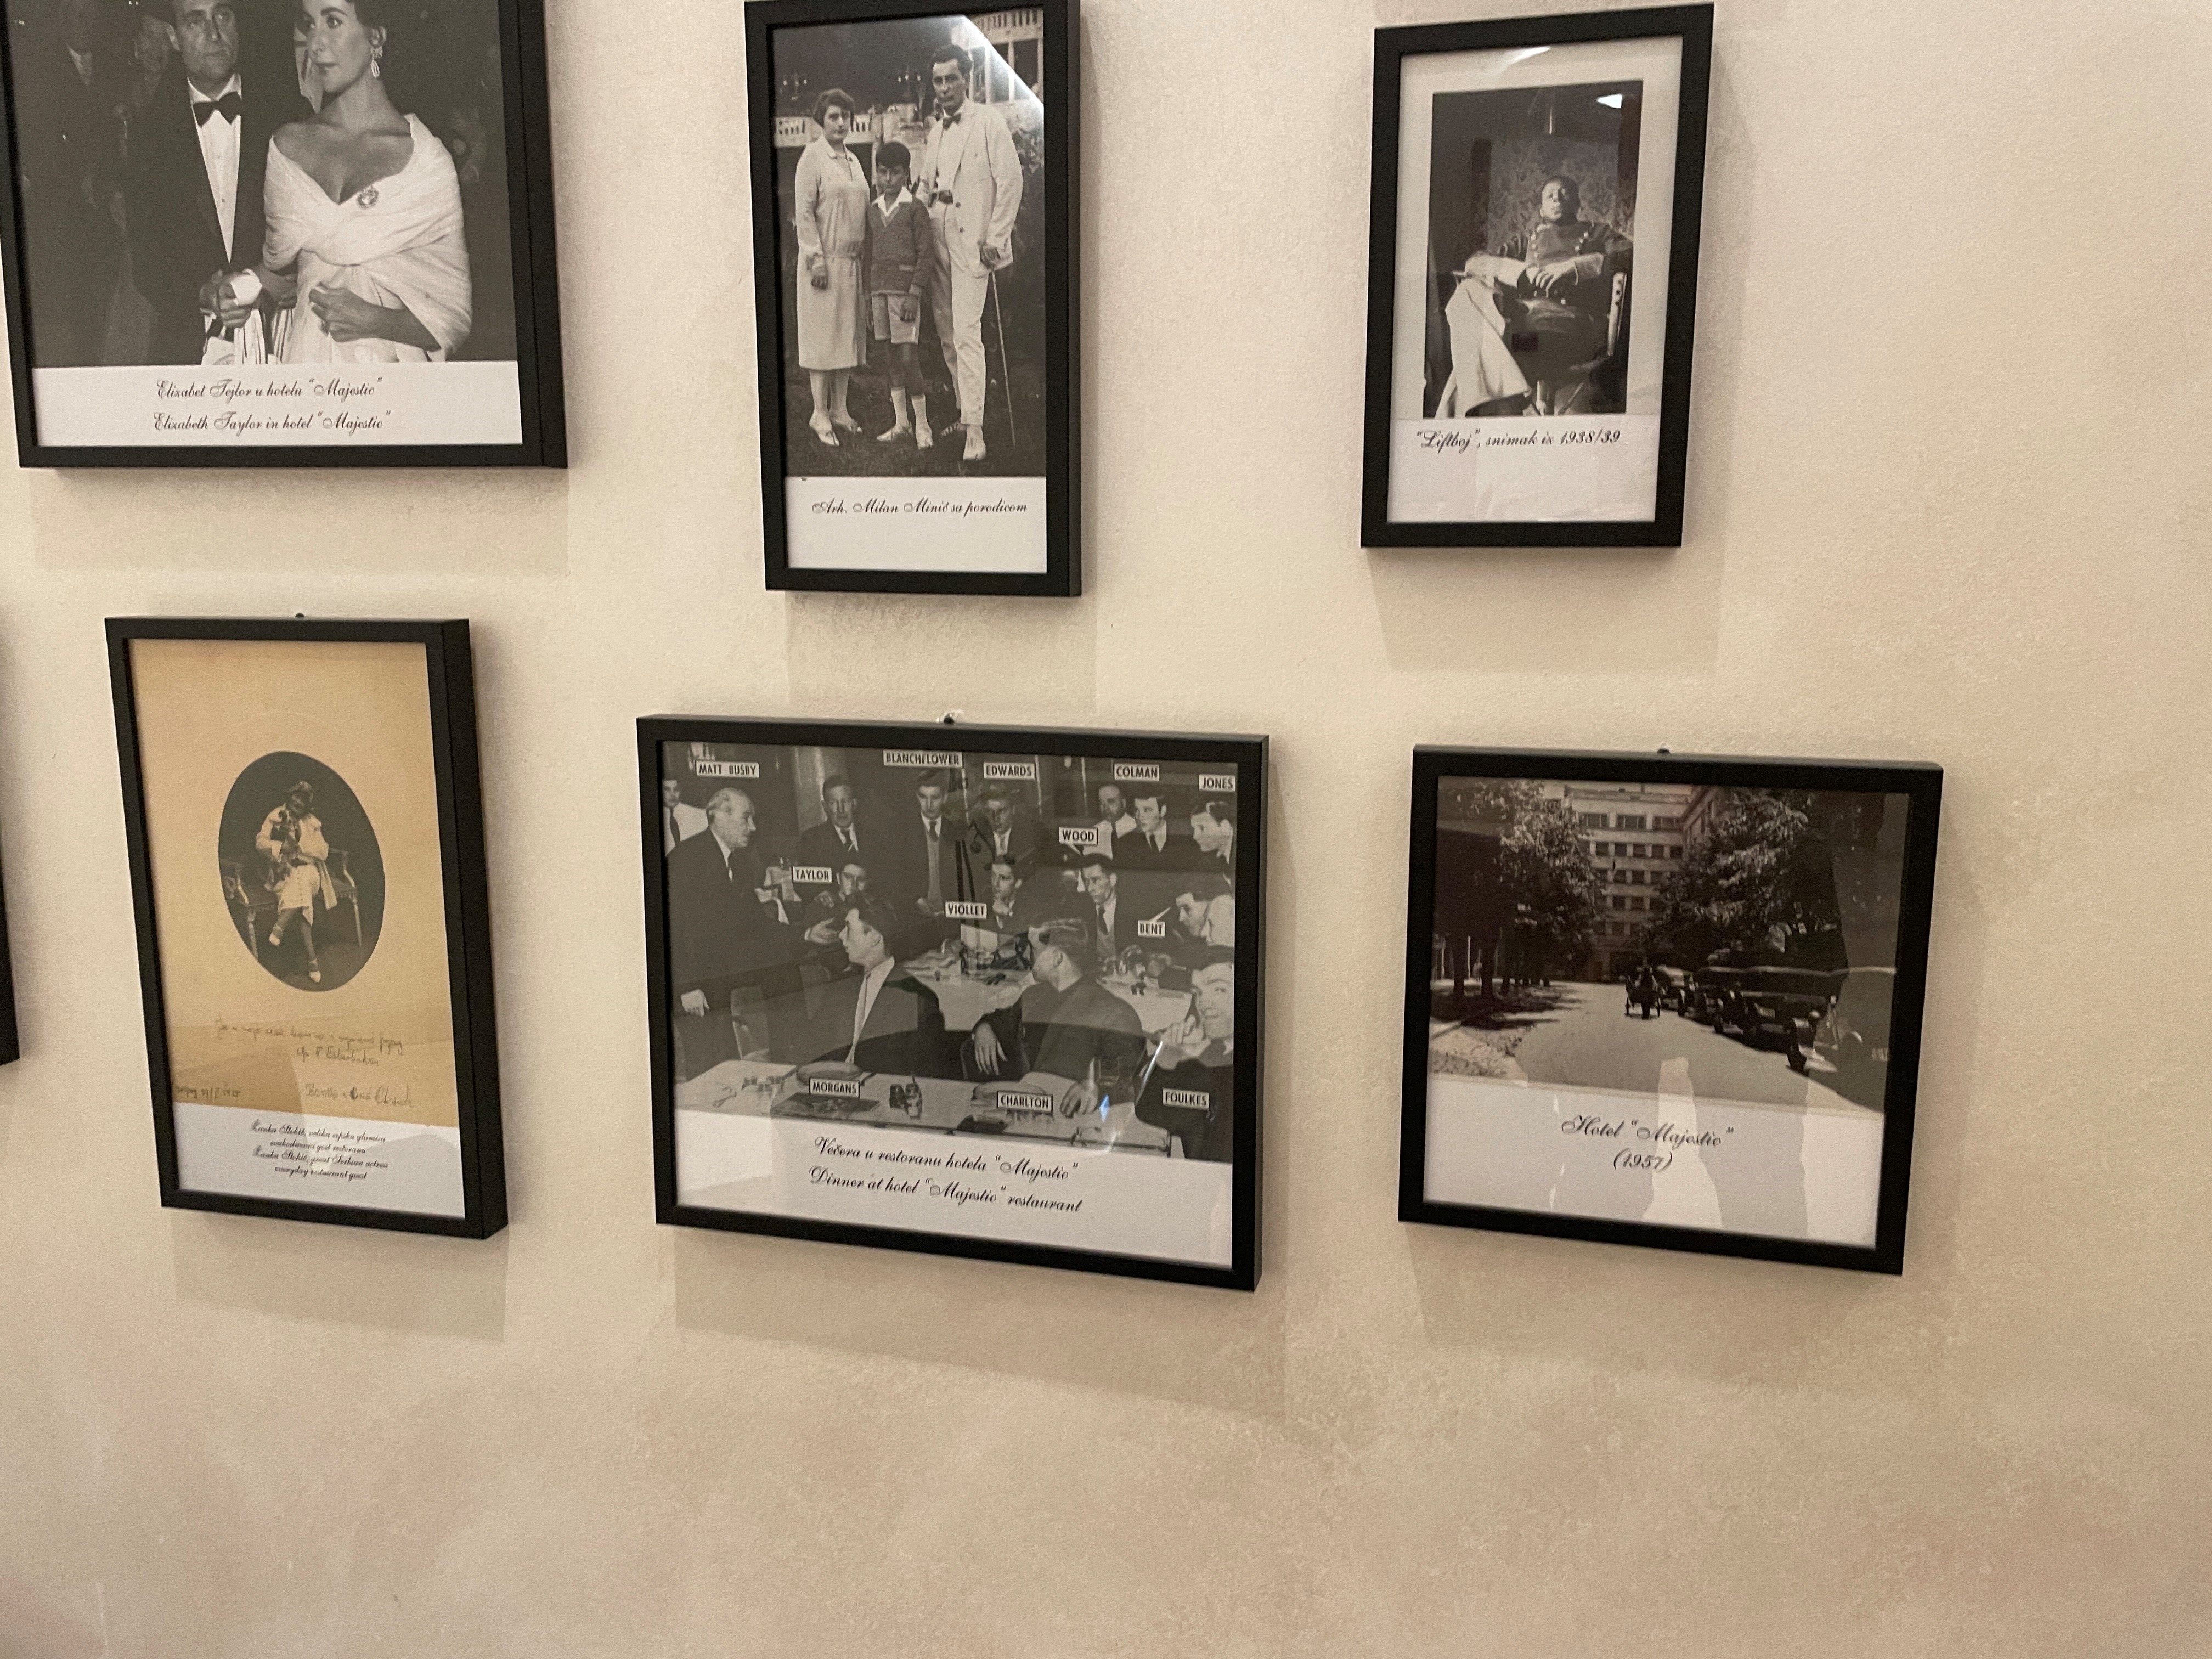 A photo of the Manchester United team on the wall of the Majestic hotel (Sarah Marshall/PA)